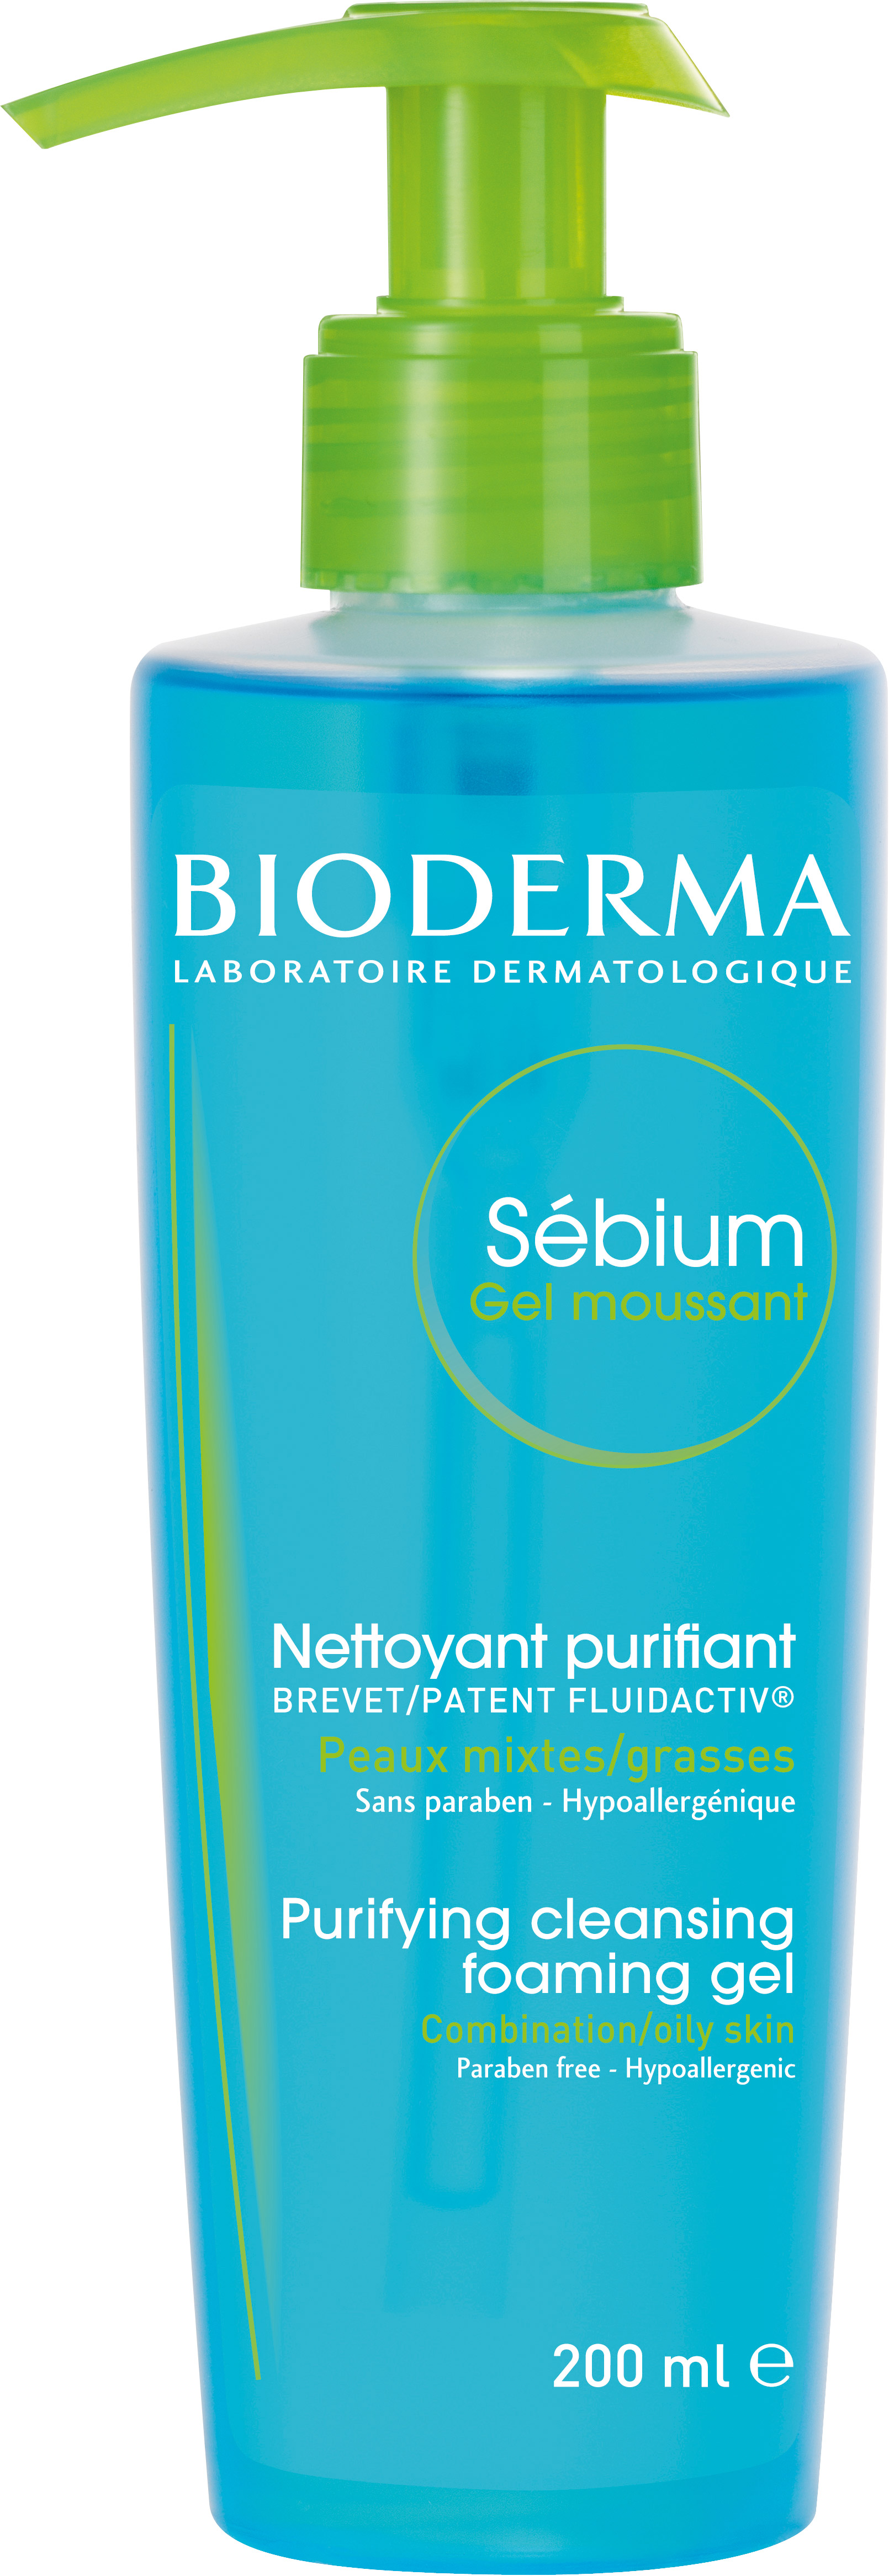 Bioderma - Sébium - Foaming Gel Pump - Cleansing and Make-Up Removing - Skin Purifying - for Combination to Oily Skin - image 1 of 5